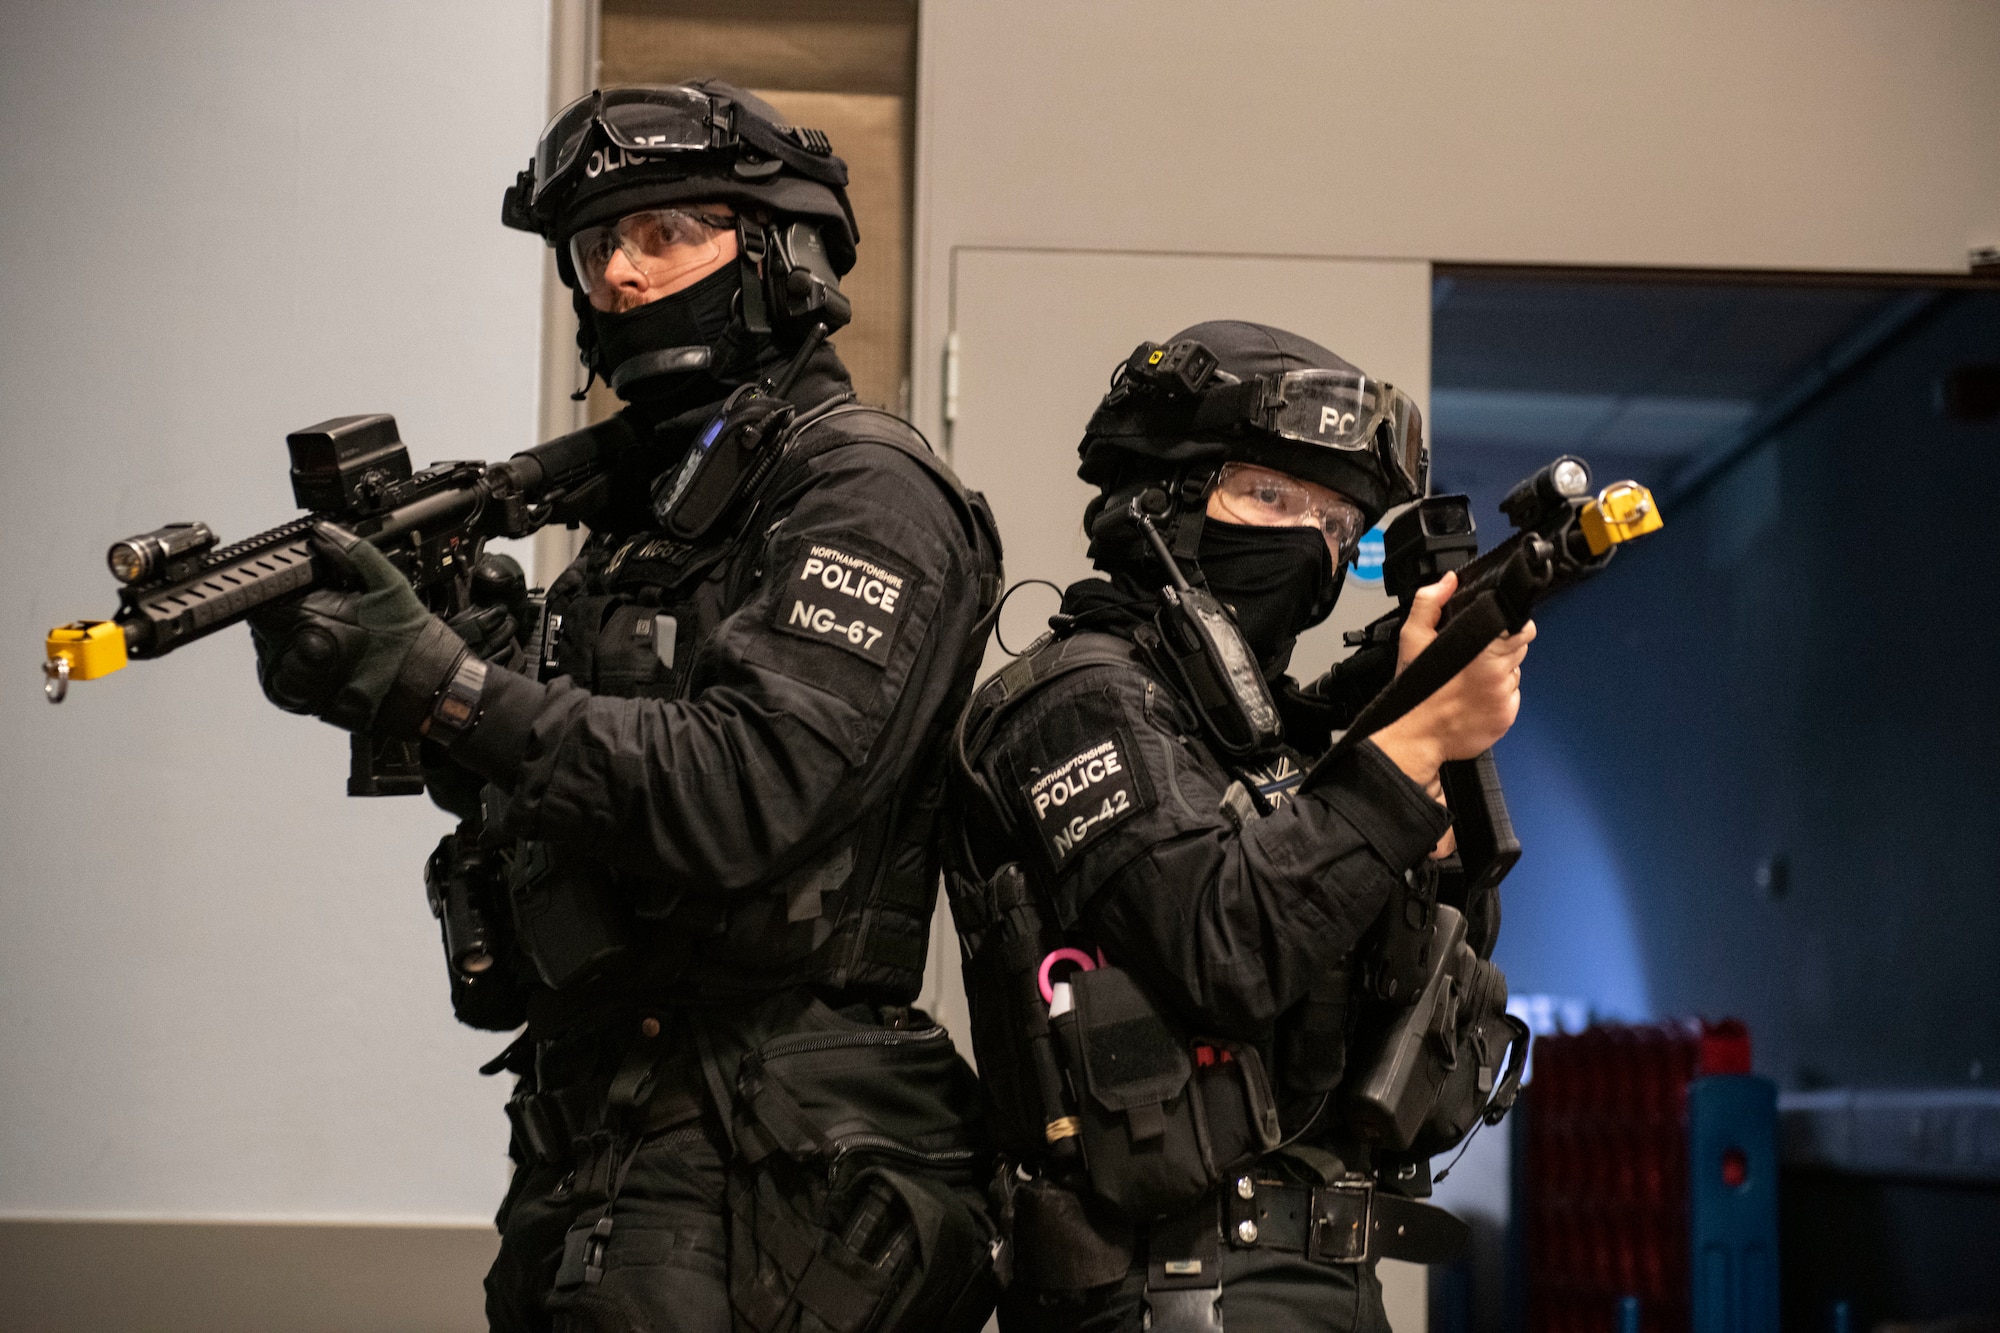 Northamptonshire Police provide cover while their teammates clear a room during an exercise at RAF Croughton